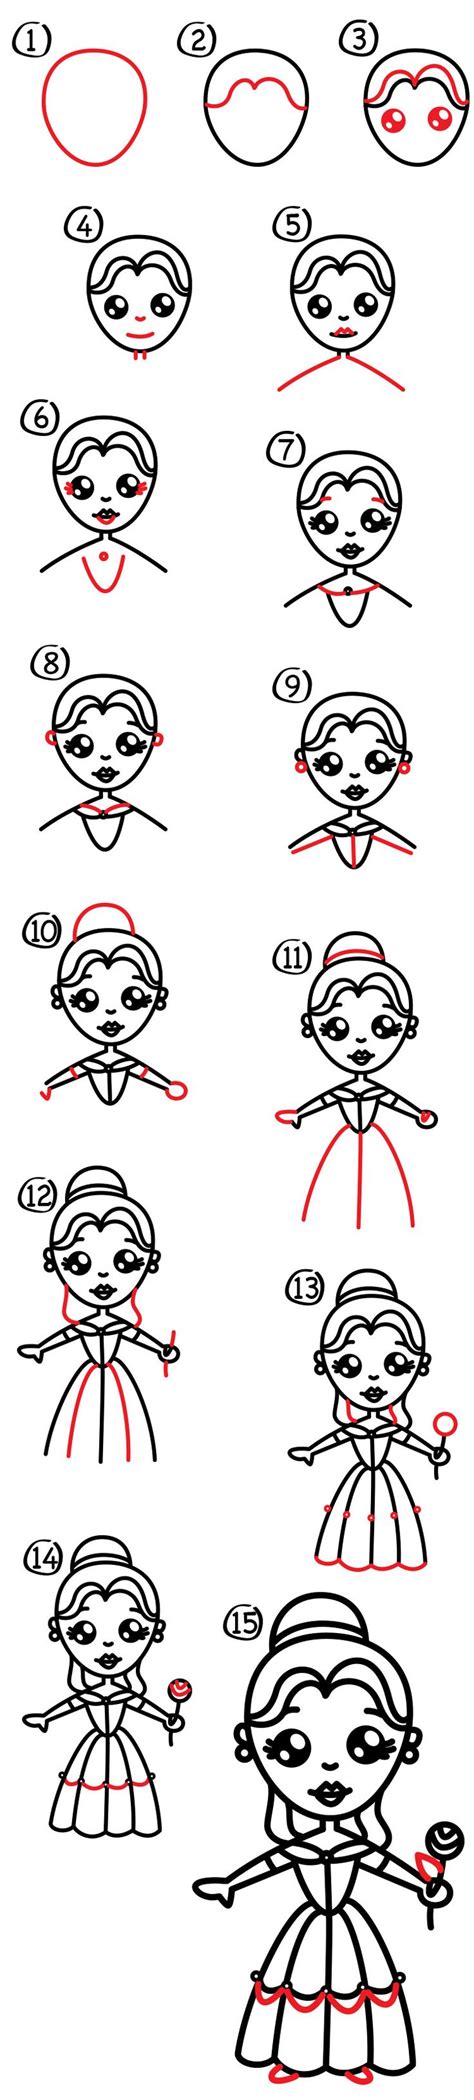 Pin By Κυριακή Tερλιγκακη On How To Draw Disney Drawings Draw Drawings